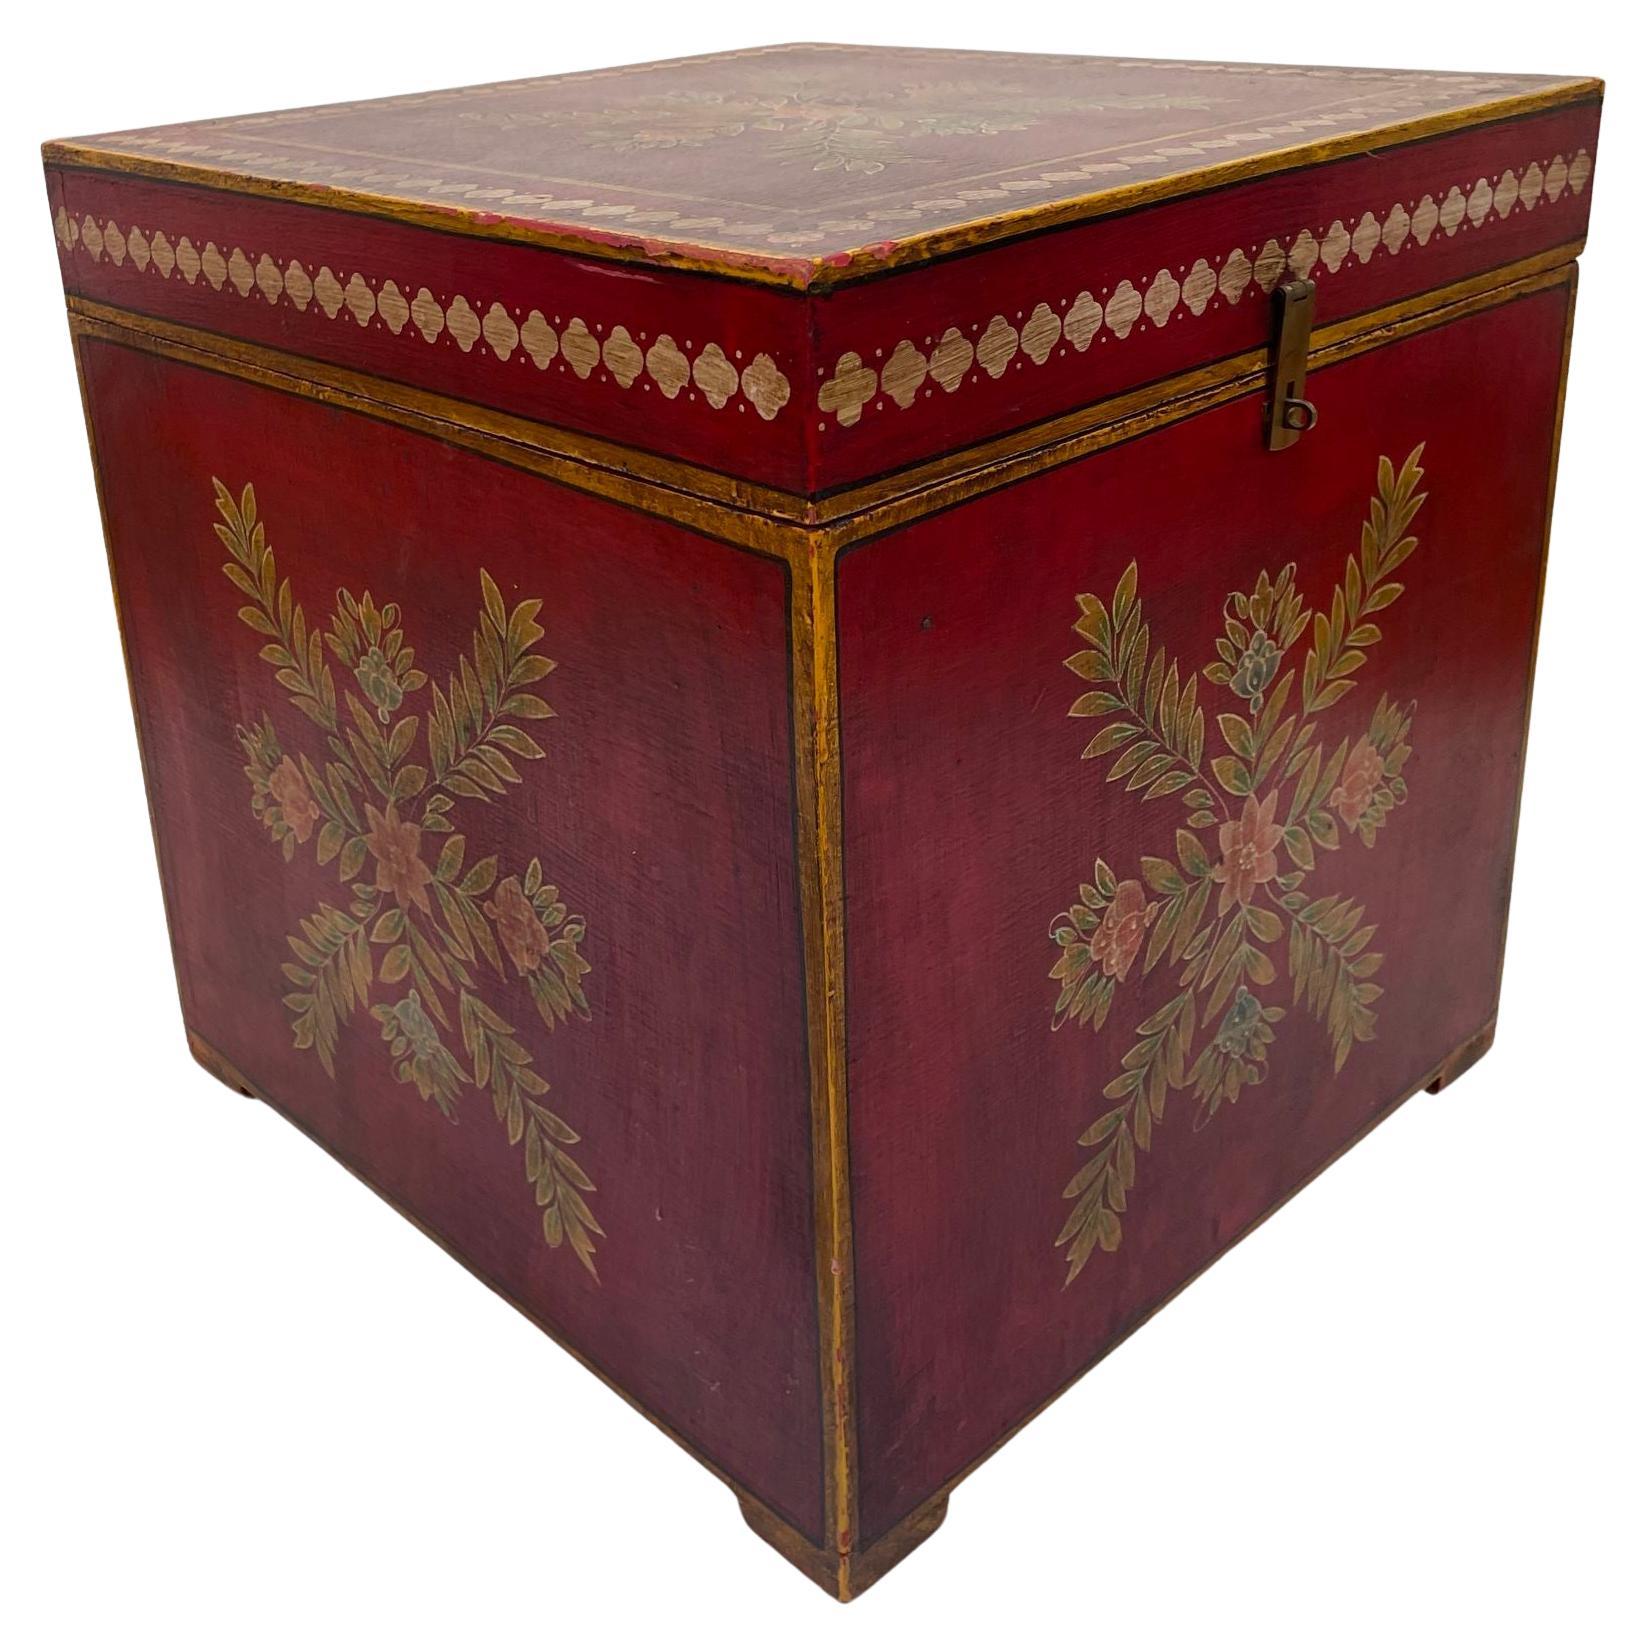 Mughal Style Folk Art Lacquer Hand Painted Decorative Storage Trunk Side Table For Sale